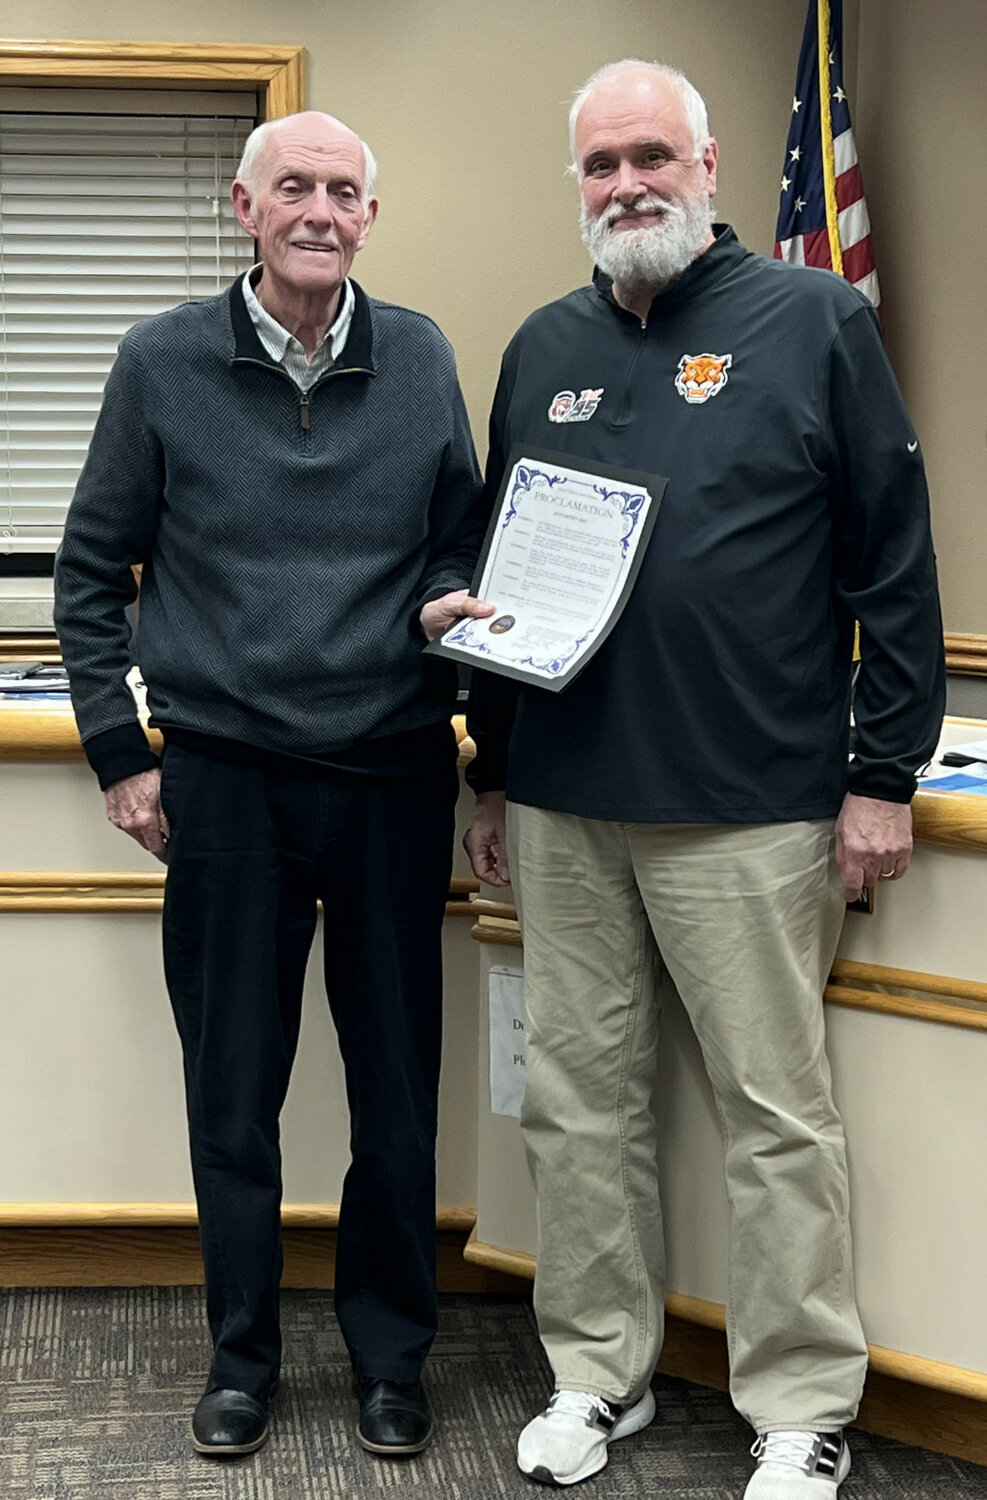 BENJAMIN CHASE / PLAINSMAN
Mayor Gary Harrington, left, recognized radio broadcaster Jeff Duffy for 40 years with the radio station and 22 years doing sports broadcasts for the Huron Tigers by declaring Tuesday, Nov. 28, as Jeff Duffy Day in Huron.